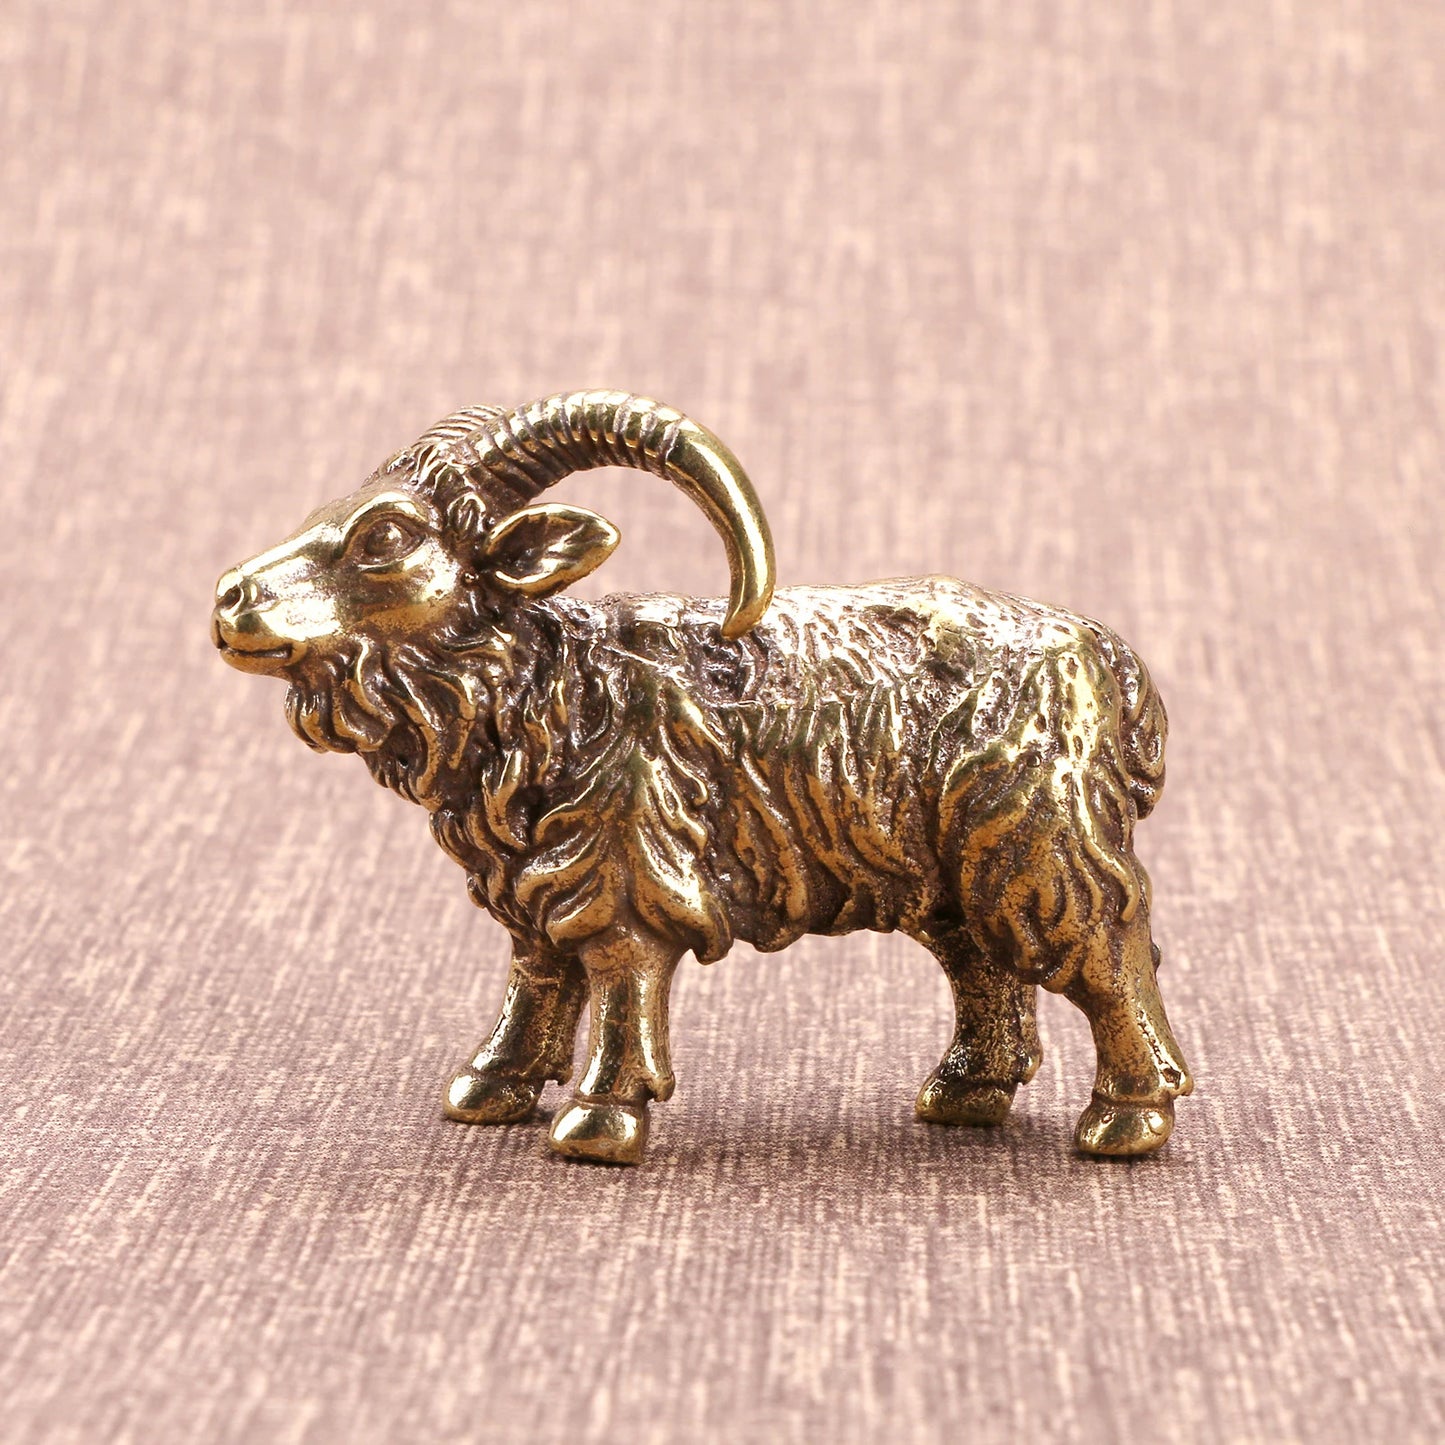 Brass Goat Statue Sculpture Simulation Crafts Home Decoration for Office